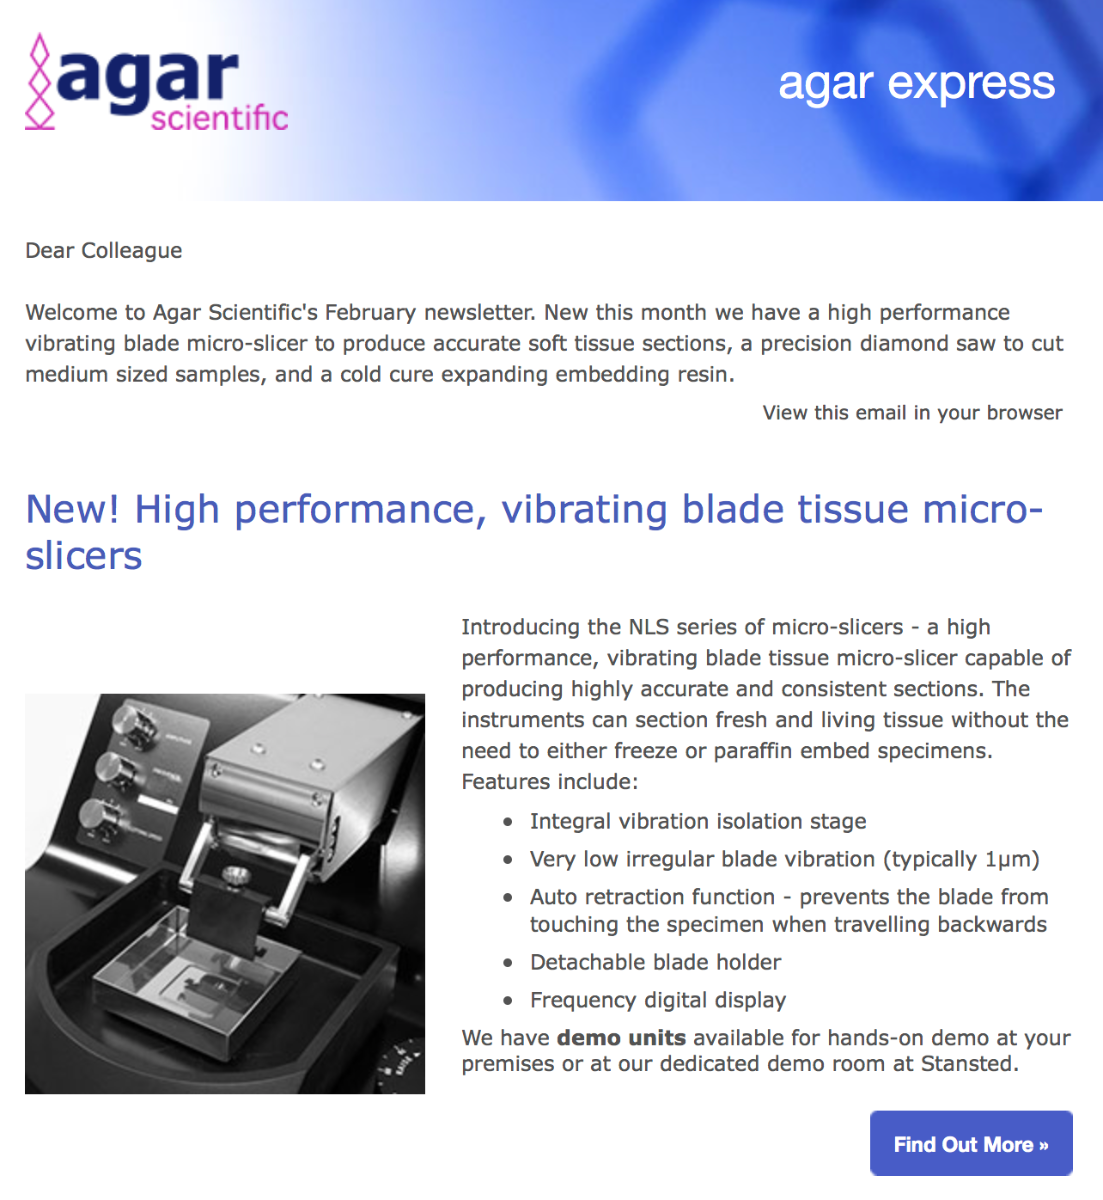 Agar Express February 2018 - introducing a new high performance vibrating blade micro-slicer and more…